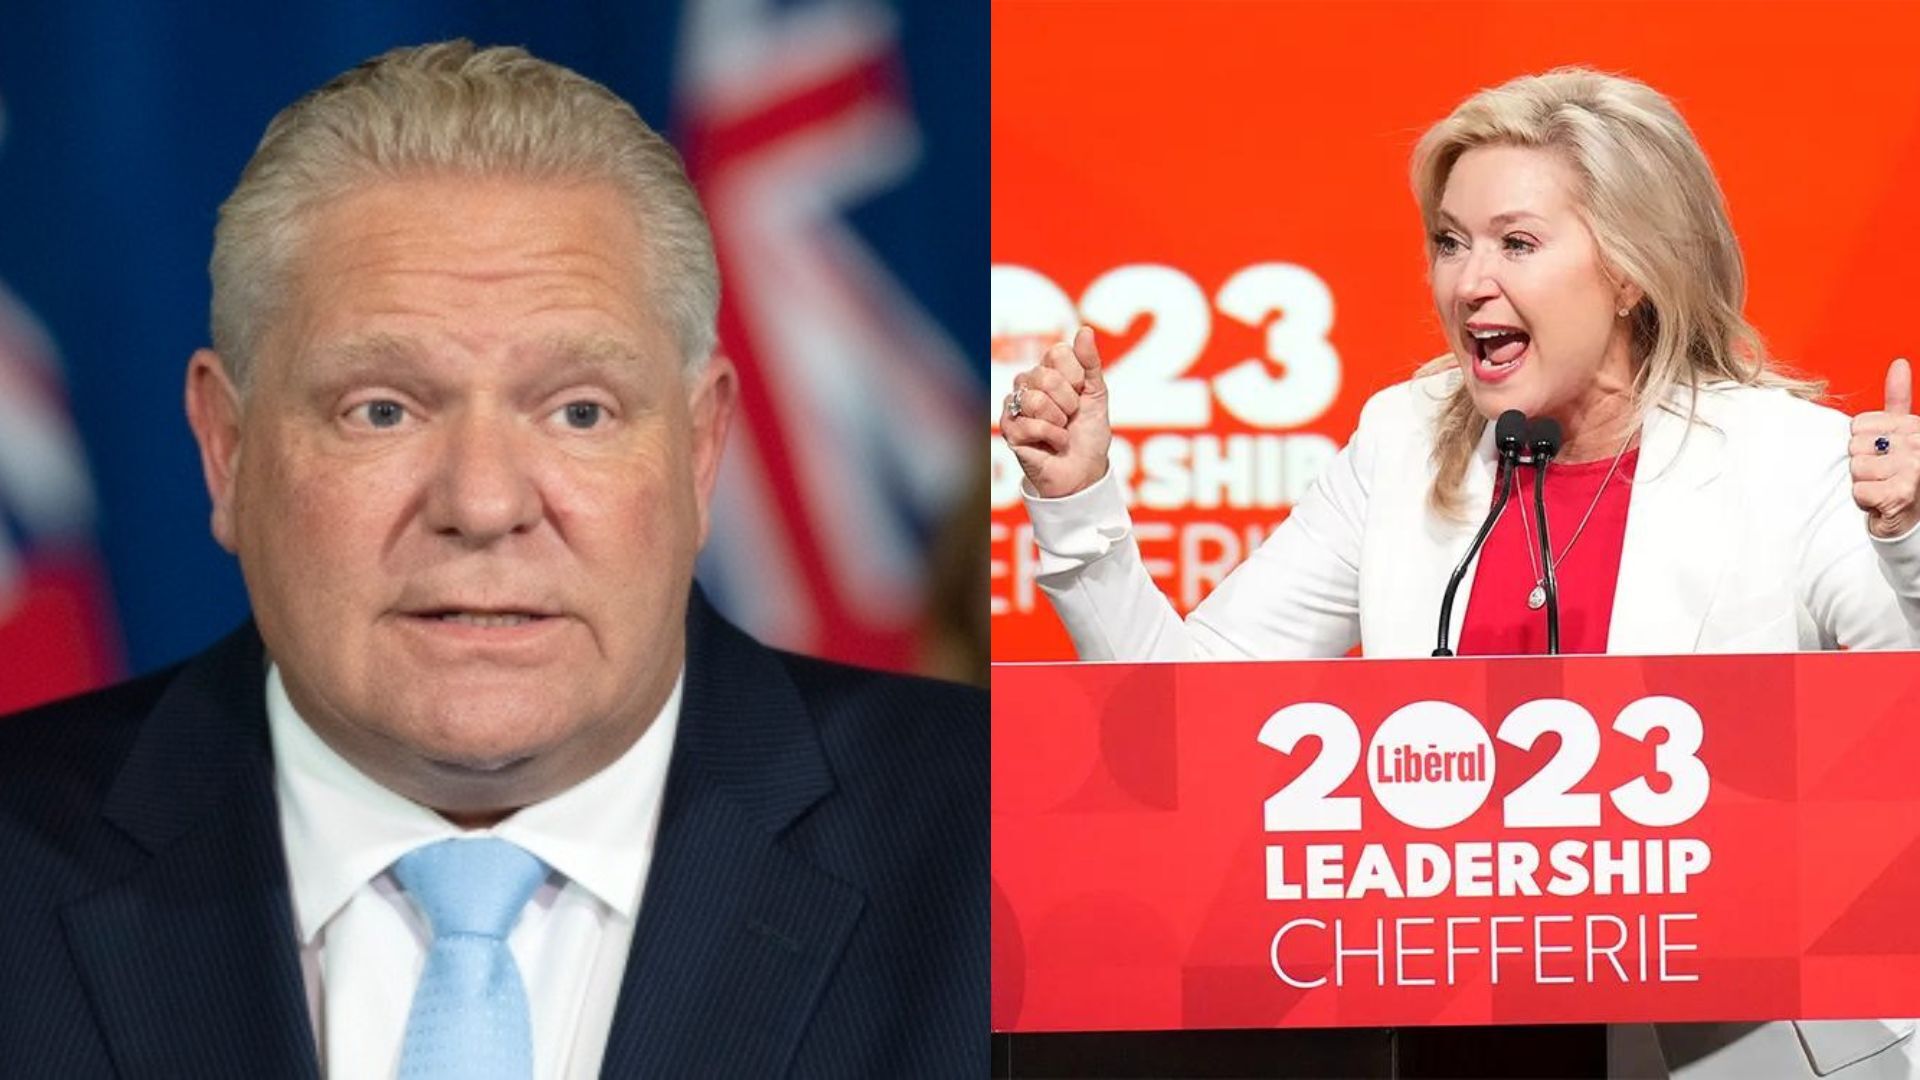 New poll finds Ontario Liberals are in a close race with the Conservative party